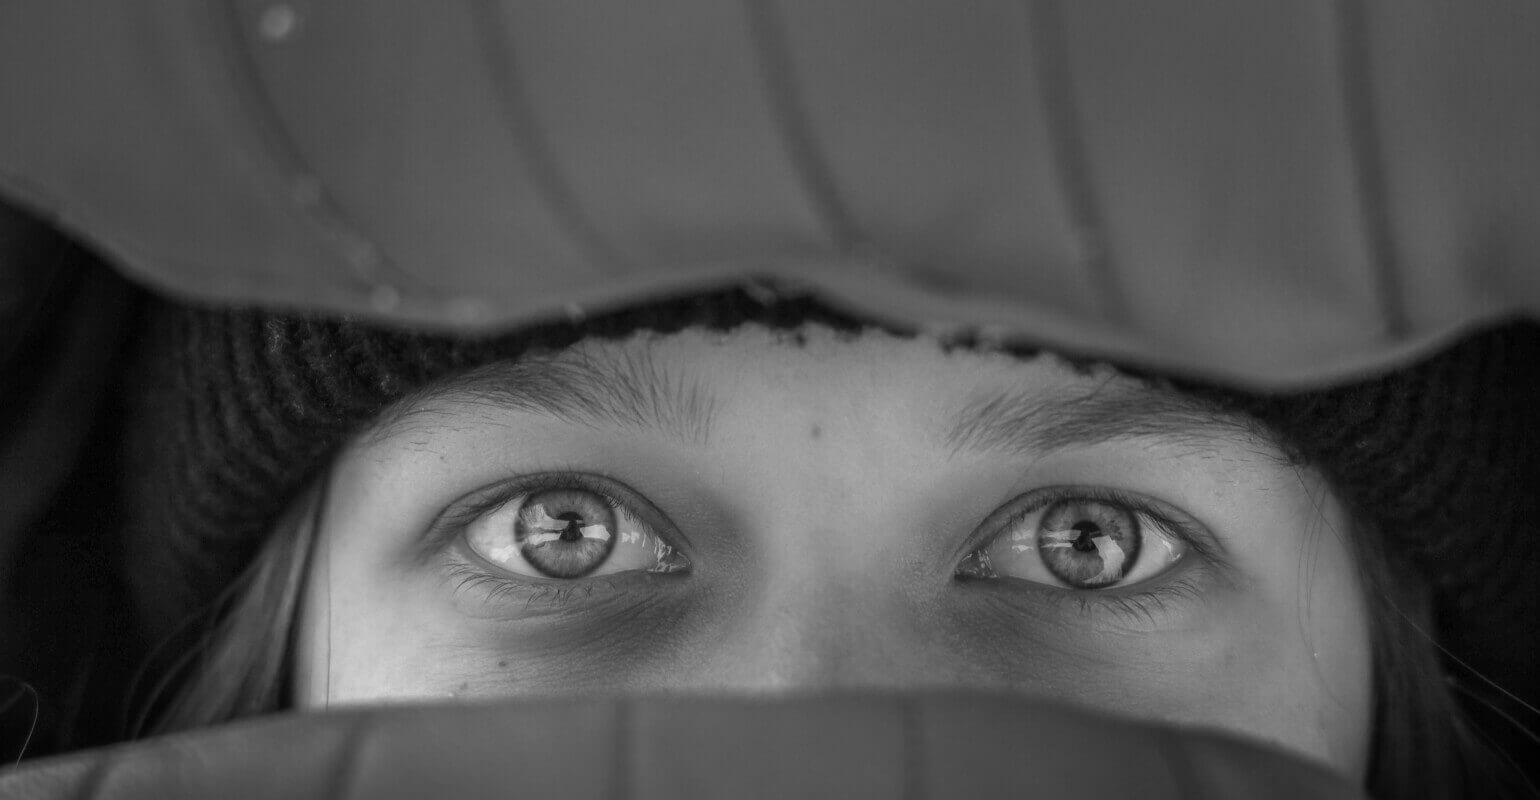 Grayscale photo of a womans eyes